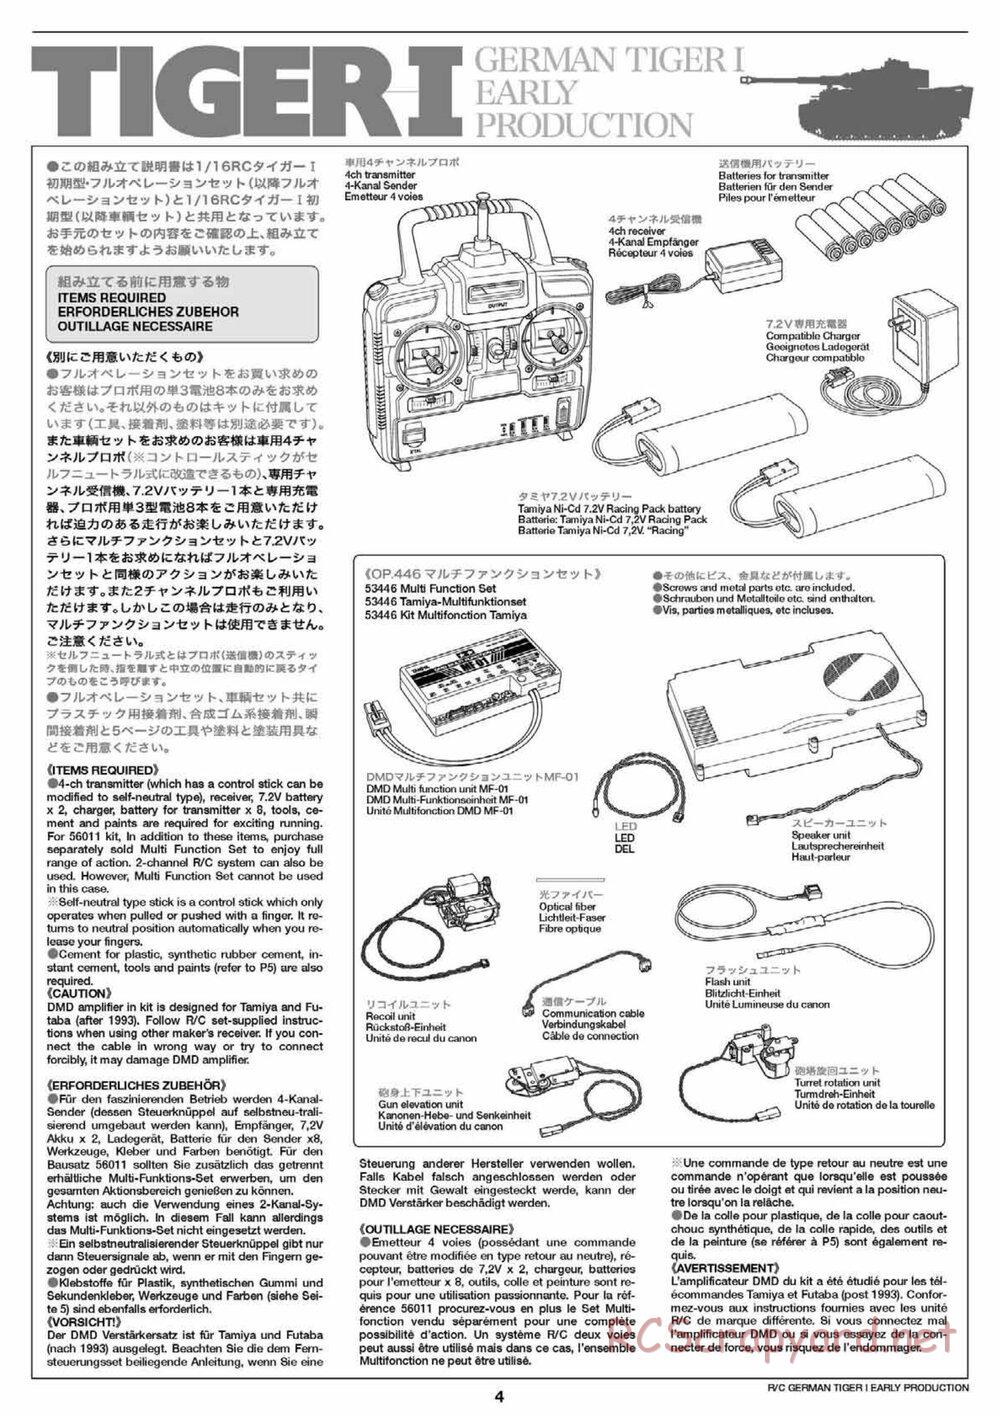 Tamiya - Tiger I Early Production - 1/16 Scale Chassis - Manual - Page 4